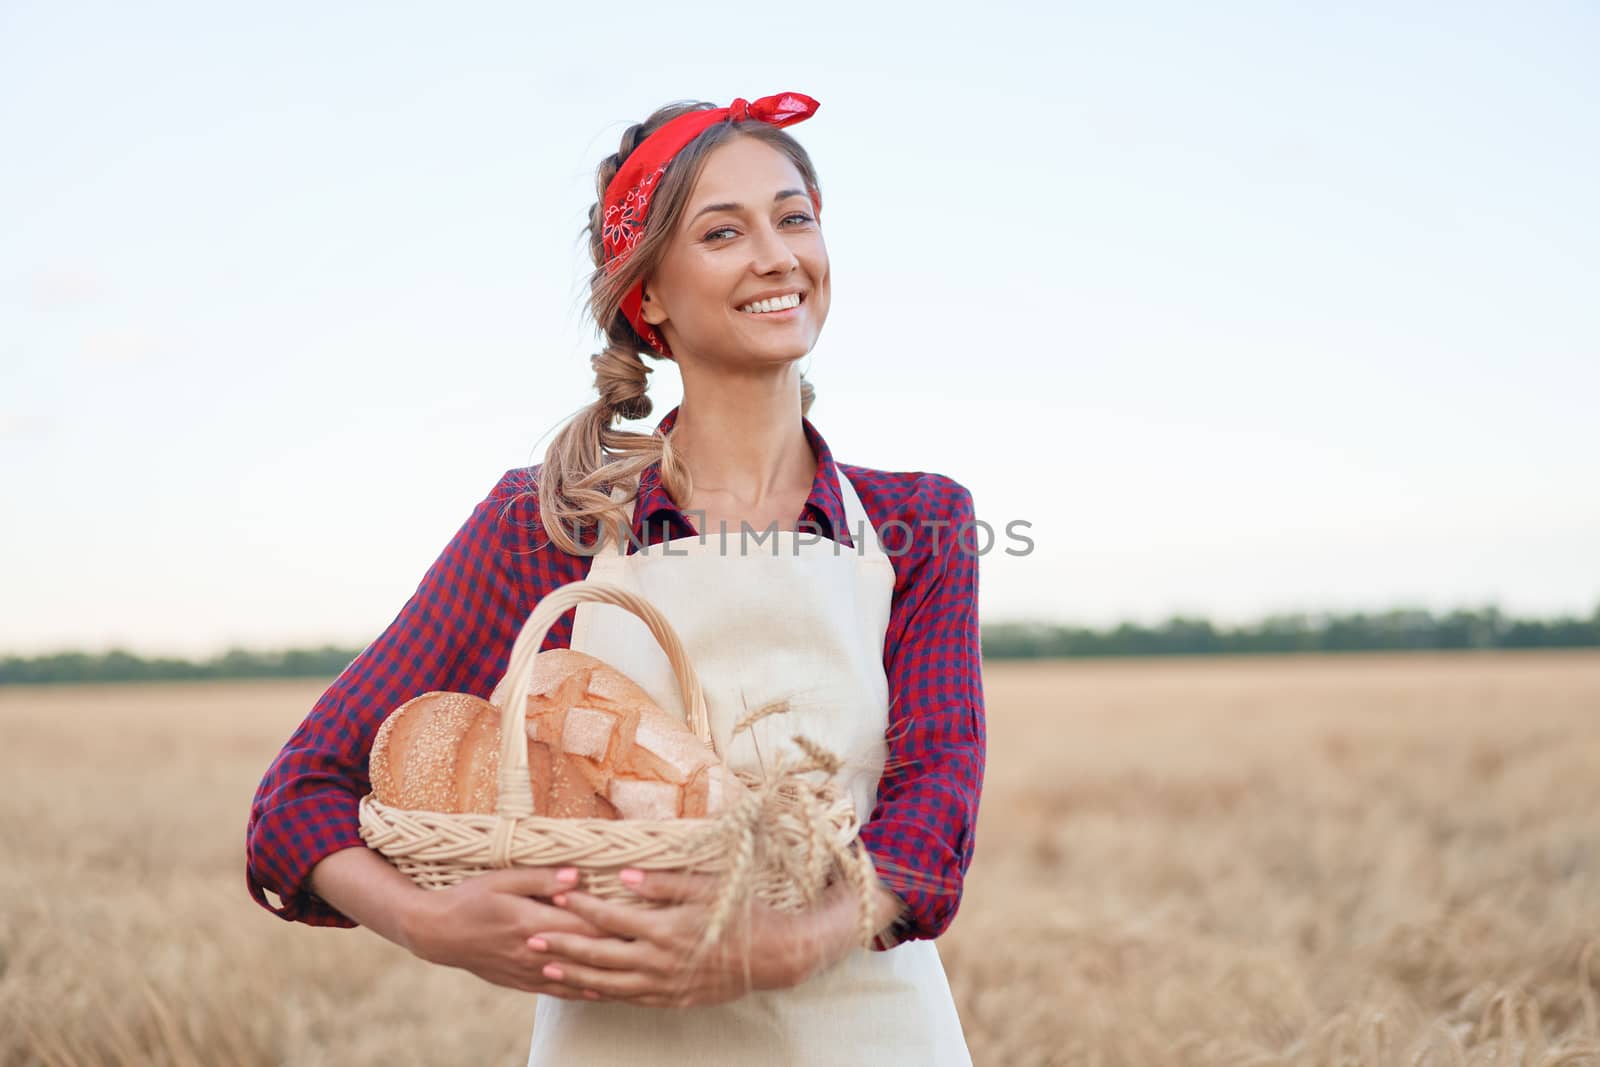 Female farmer standing wheat agricultural field Woman baker holding wicker basket bread eco product Baking small business Caucasian person dressed red checkered shirt apron organic healthy food